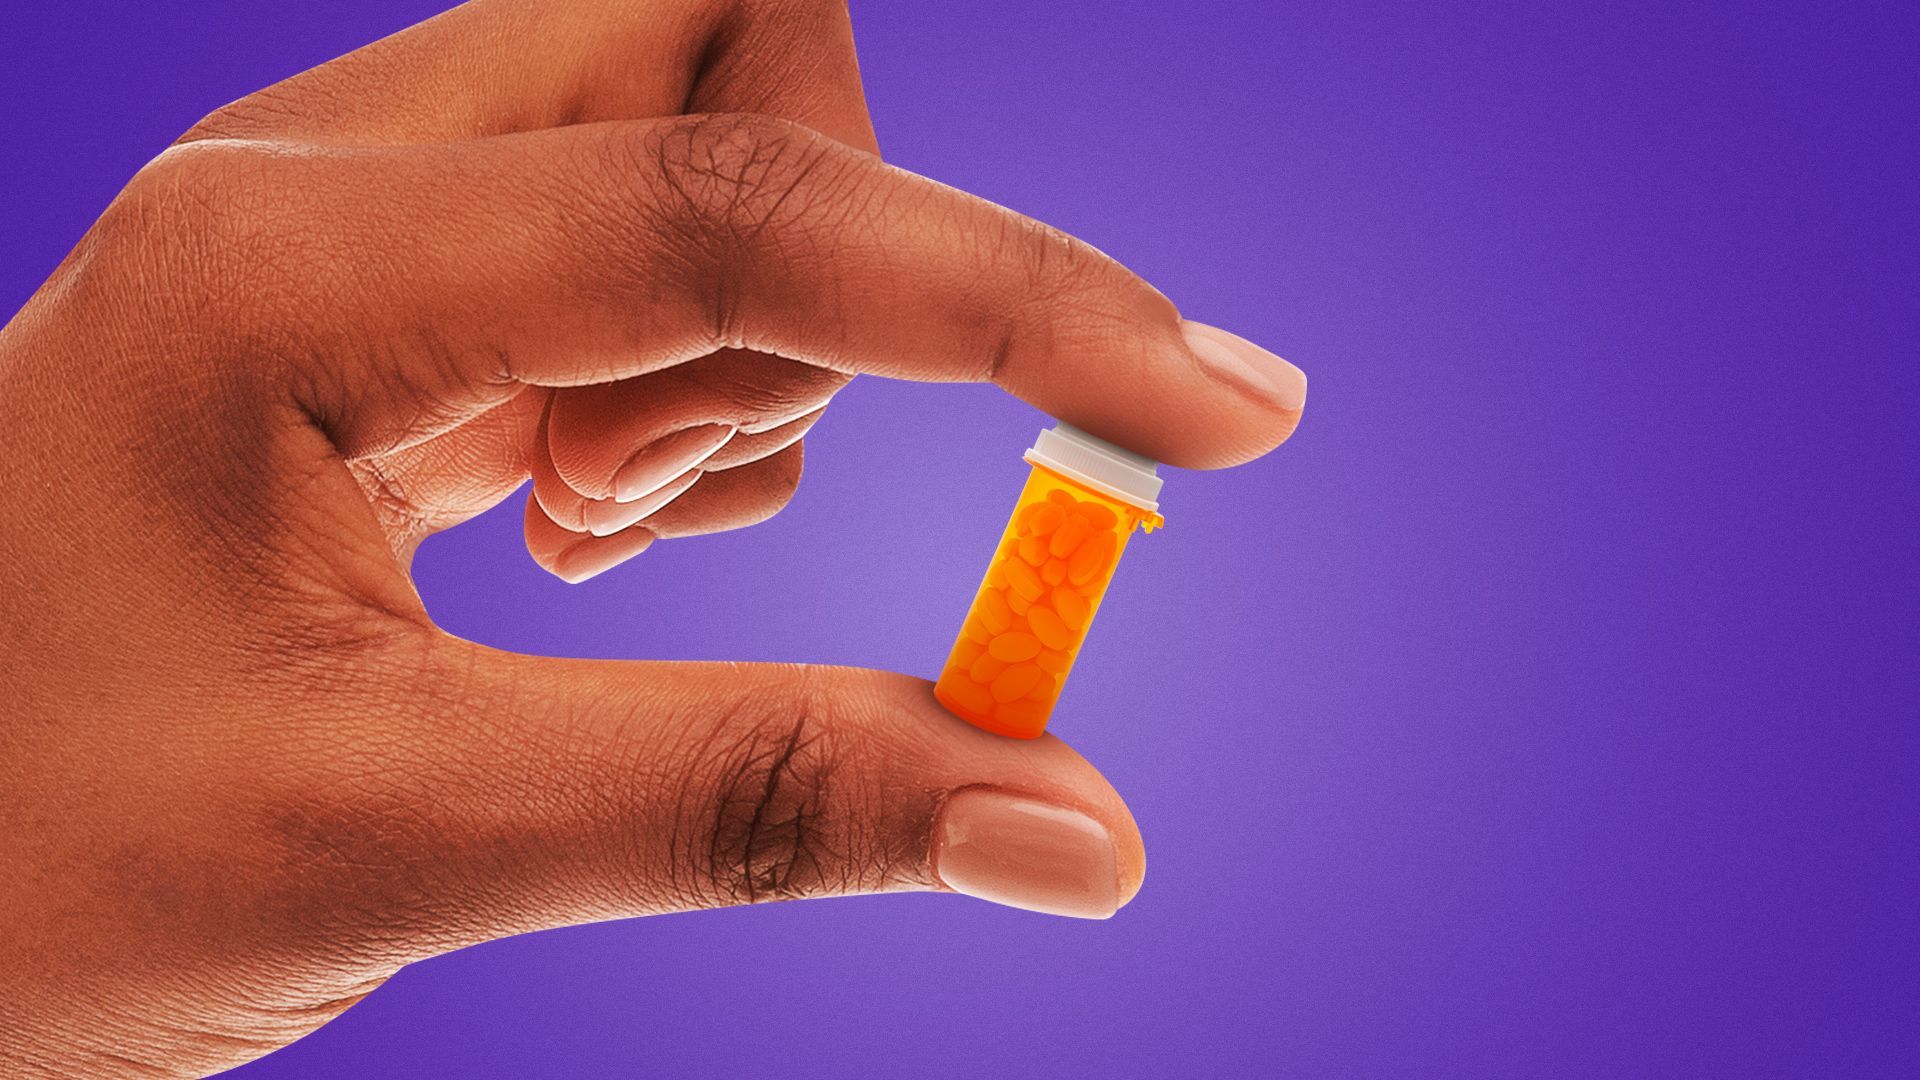 Illustration of an extreme close up of a hand holding a prescription bottle between the thumb and index fingers. 